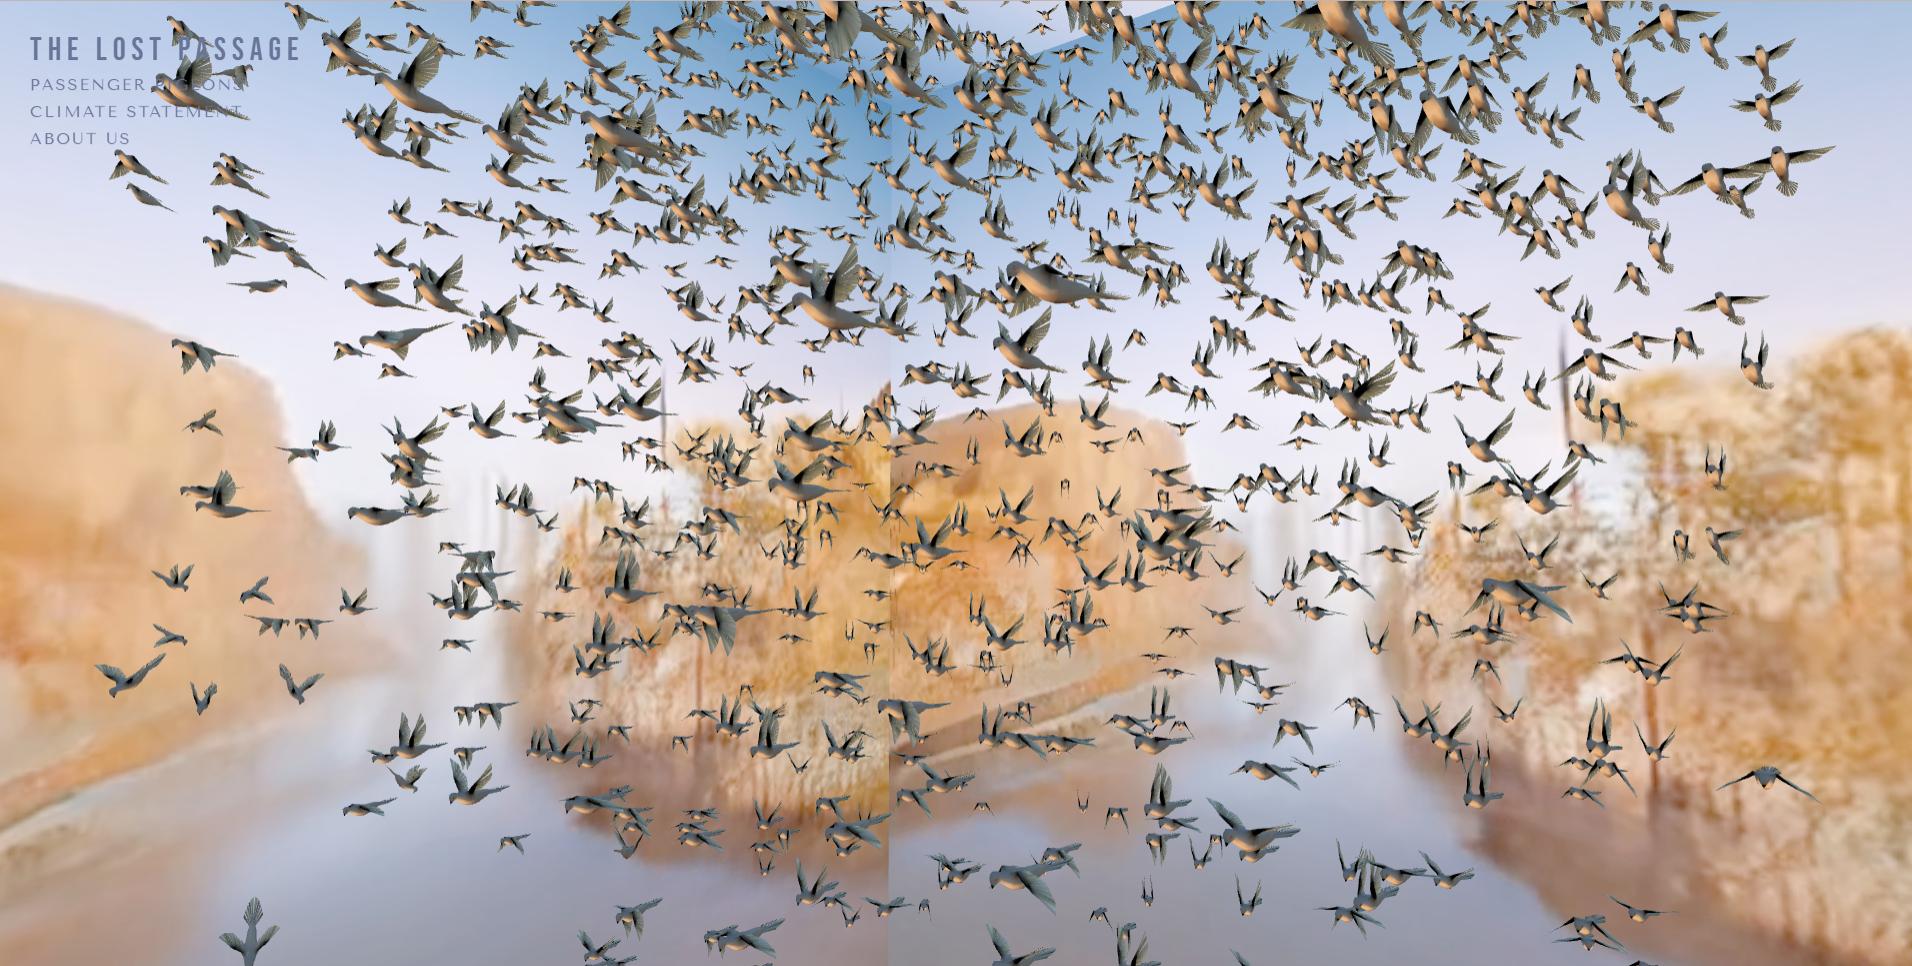 A flock of hundres of digitally-generated 3D passenger pigeons